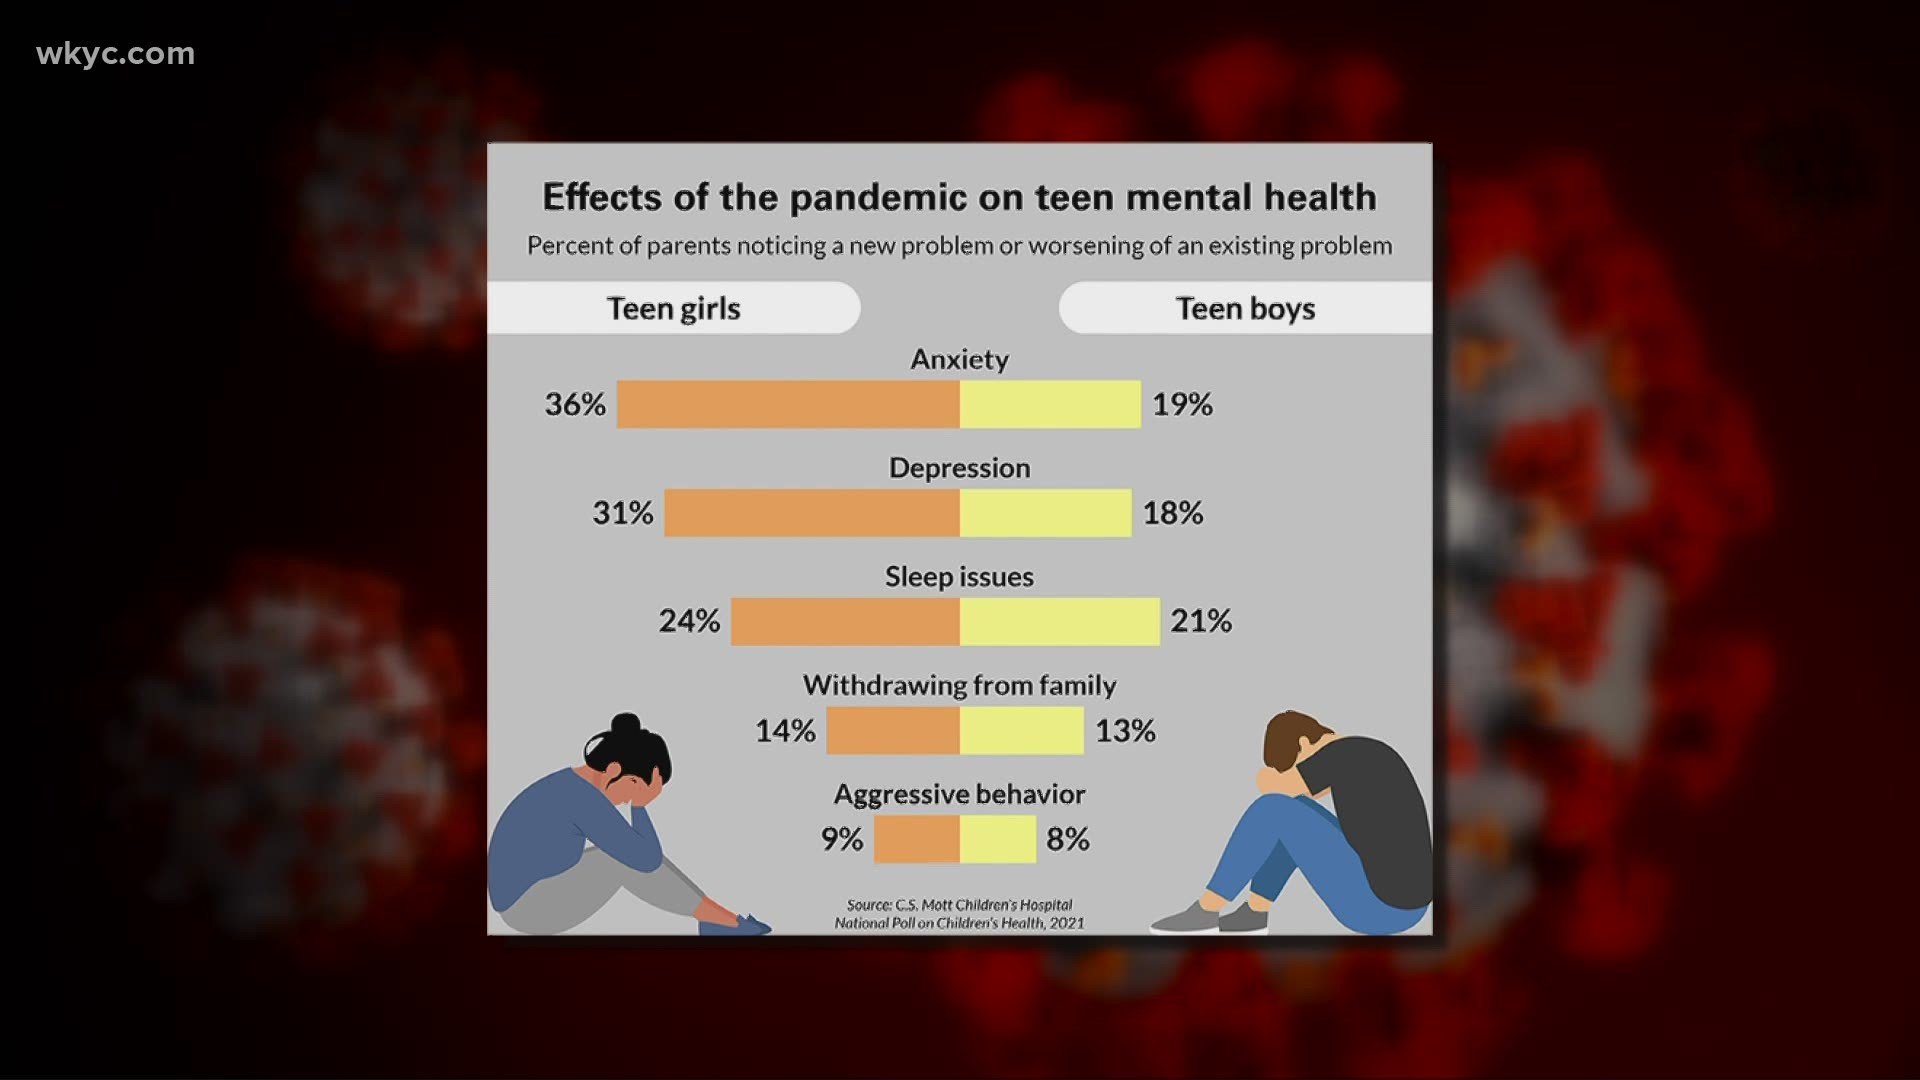 Parents surveyed say nearly half of teens have suffered from mental health issues during the pandemic. Matt Wintz has more.